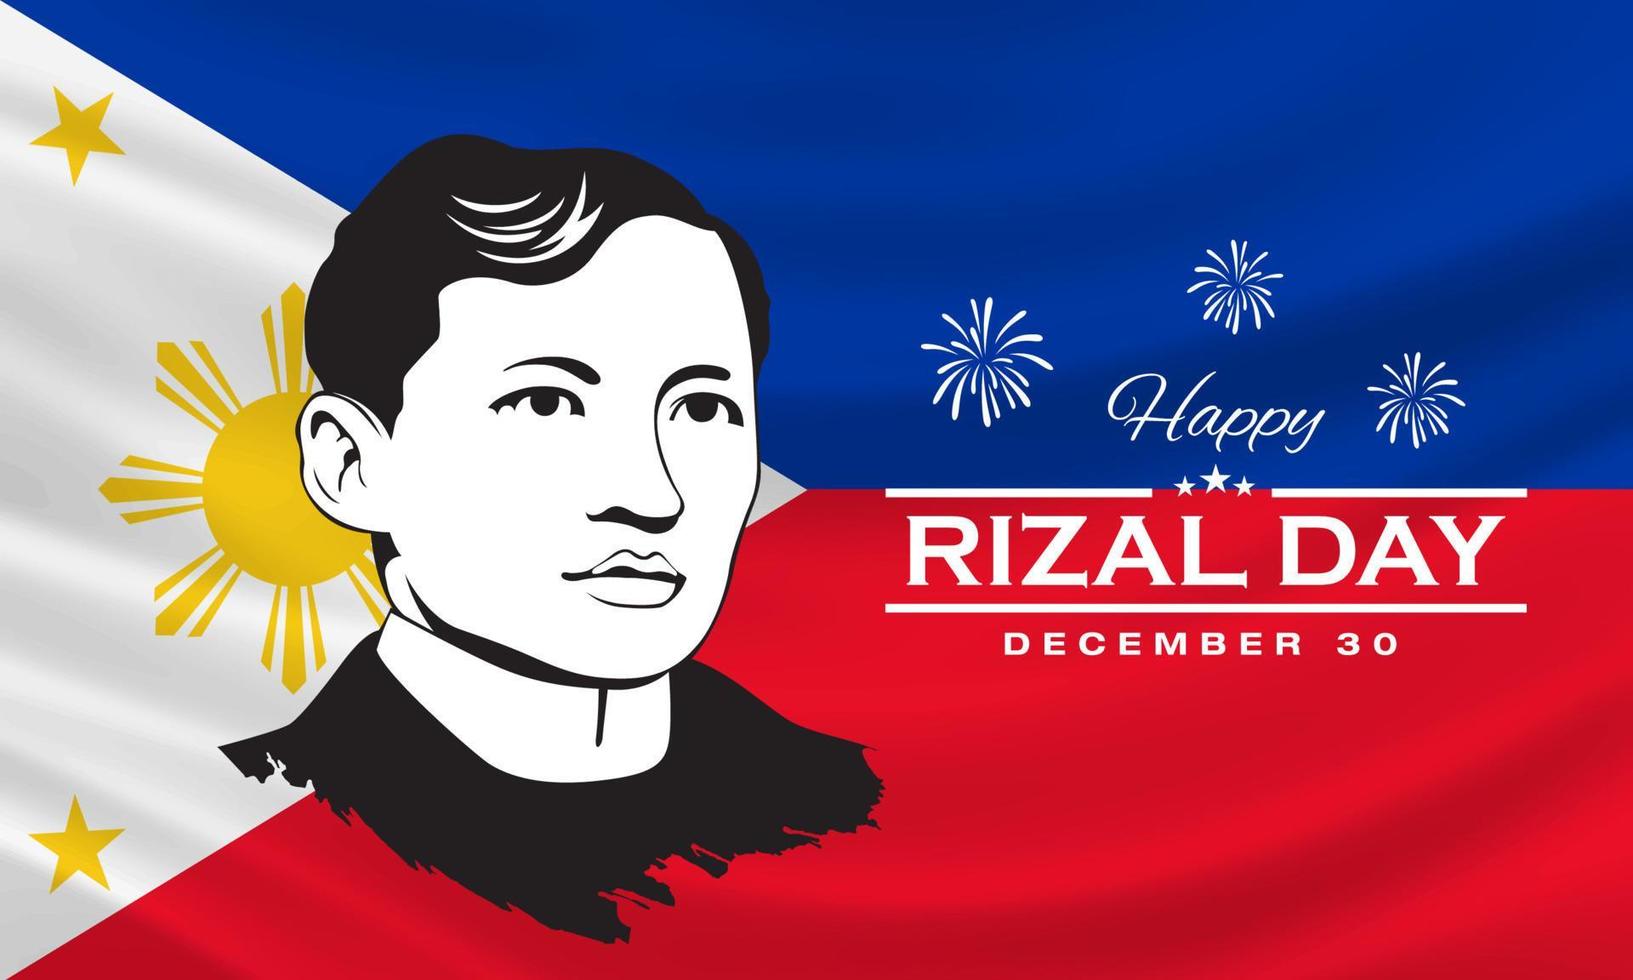 Happy Rizal Day greeting card. vector illustration for greeting card, poster and banner